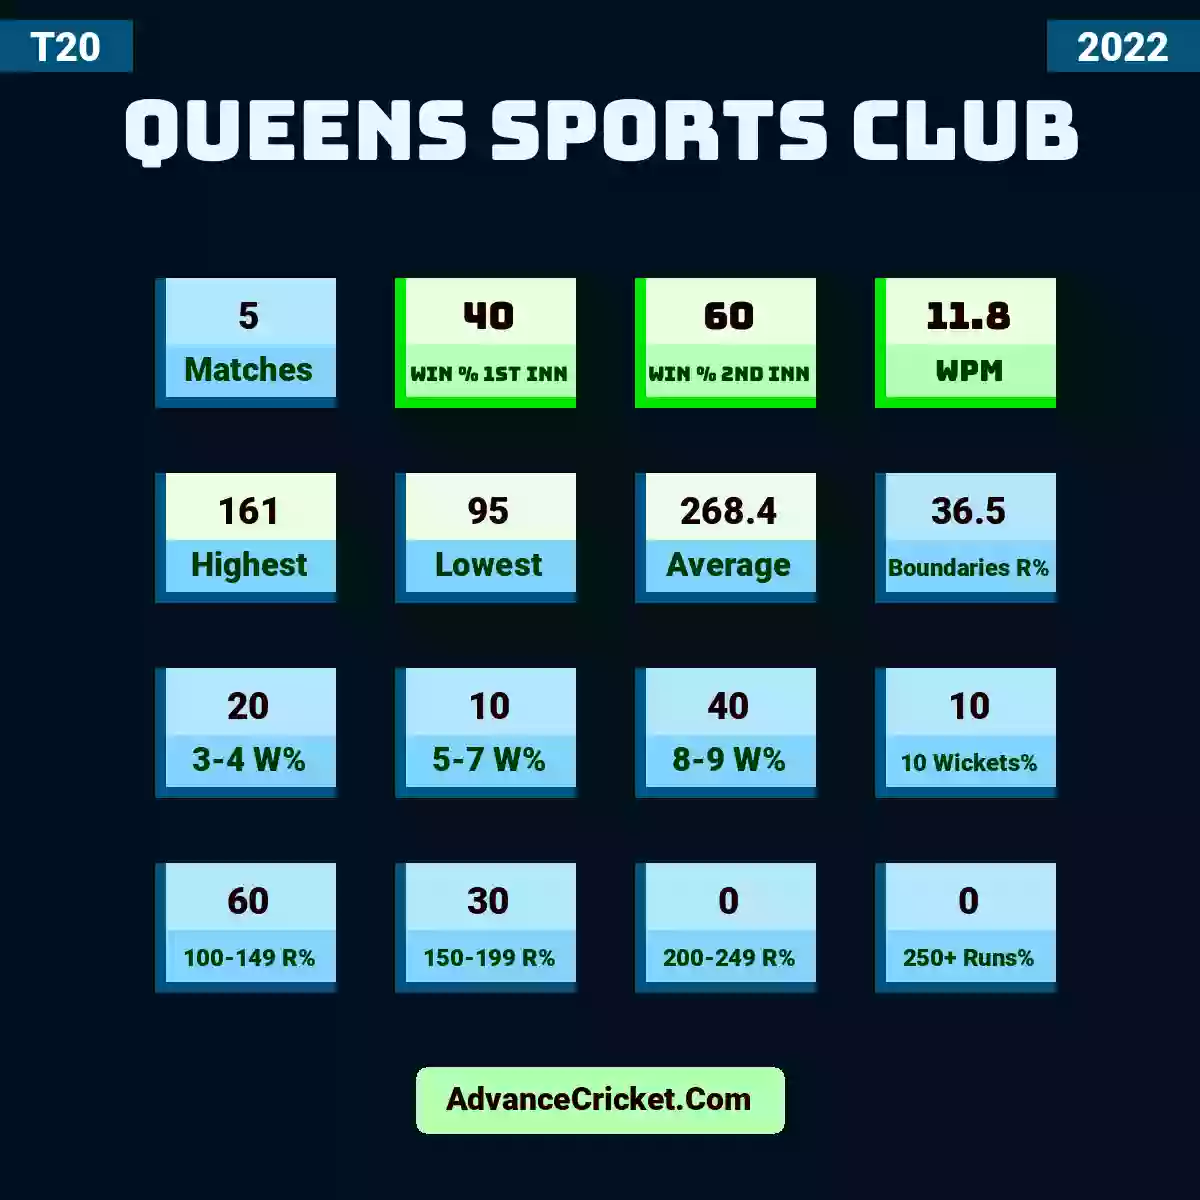 Image showing Queens Sports Club with Matches: 5, Win % 1st Inn: 40, Win % 2nd Inn: 60, WPM: 11.8, Highest: 161, Lowest: 95, Average: 268.4, Boundaries R%: 36.5, 3-4 W%: 20, 5-7 W%: 10, 8-9 W%: 40, 10 Wickets%: 10, 100-149 R%: 60, 150-199 R%: 30, 200-249 R%: 0, 250+ Runs%: 0.